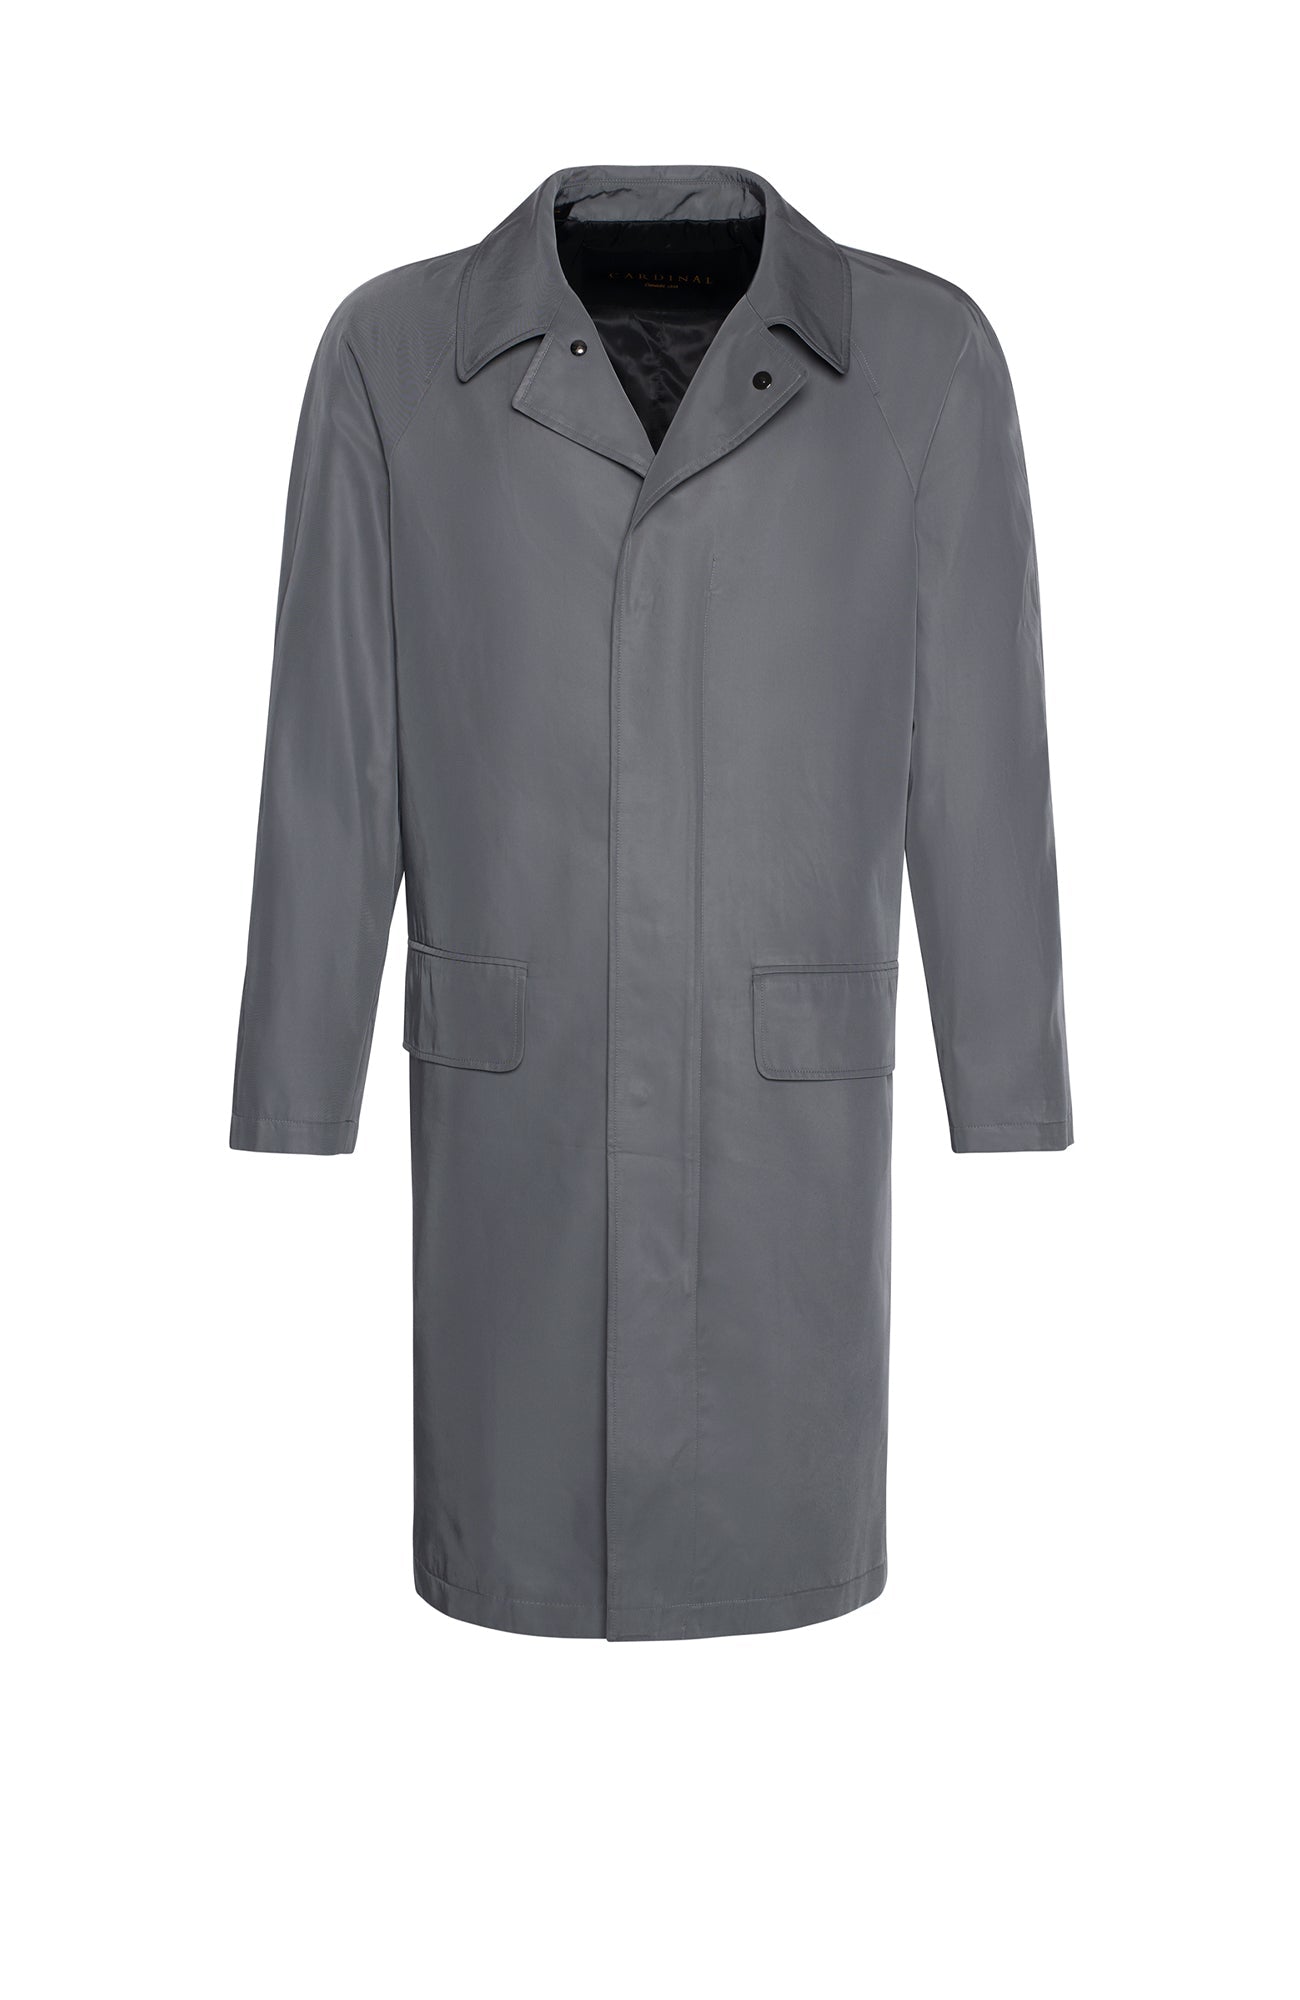 LIMITED EDITION: COLE GREY BELTED RAINCOAT - MENS - Cardinal of Canada-US-LIMITED EDITION: COLE GREY BELTED RAINCOAT 41 INCH LENGTH